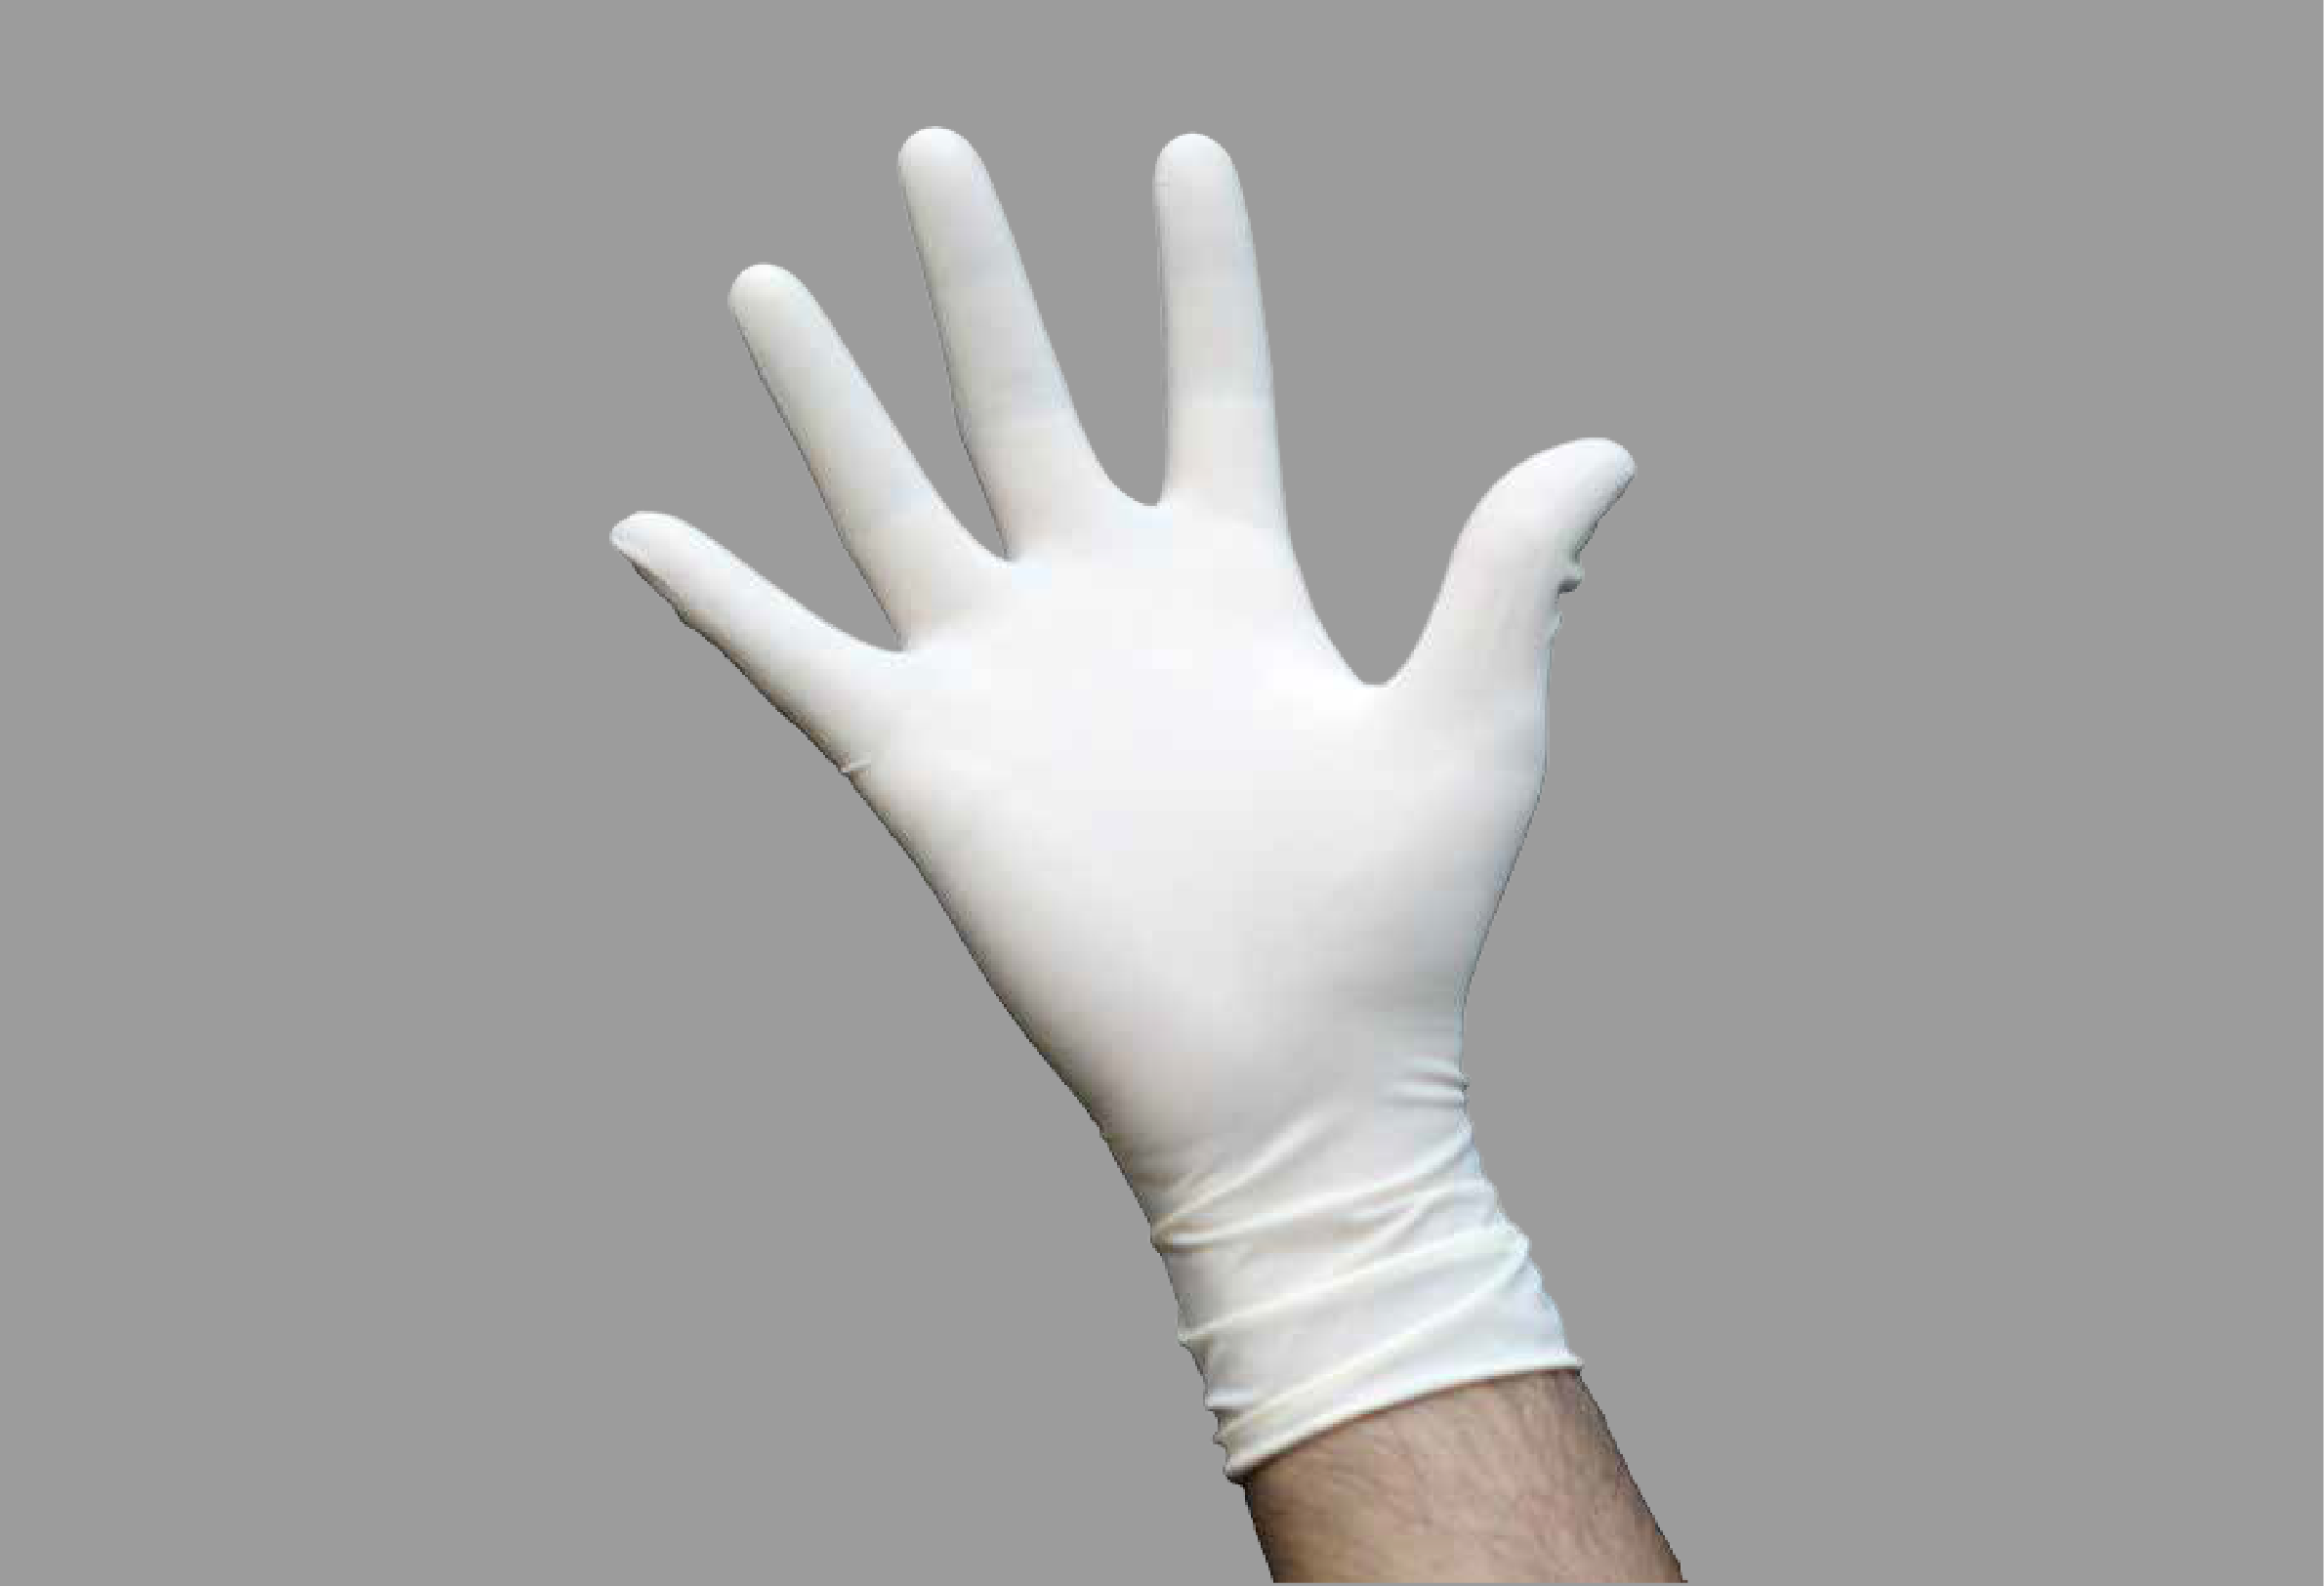 Healthium Medtech clocks its 3rd Innovation in 6 months with TRUSHIELD AMG- first of its kind Anti-Microbial gloves in India